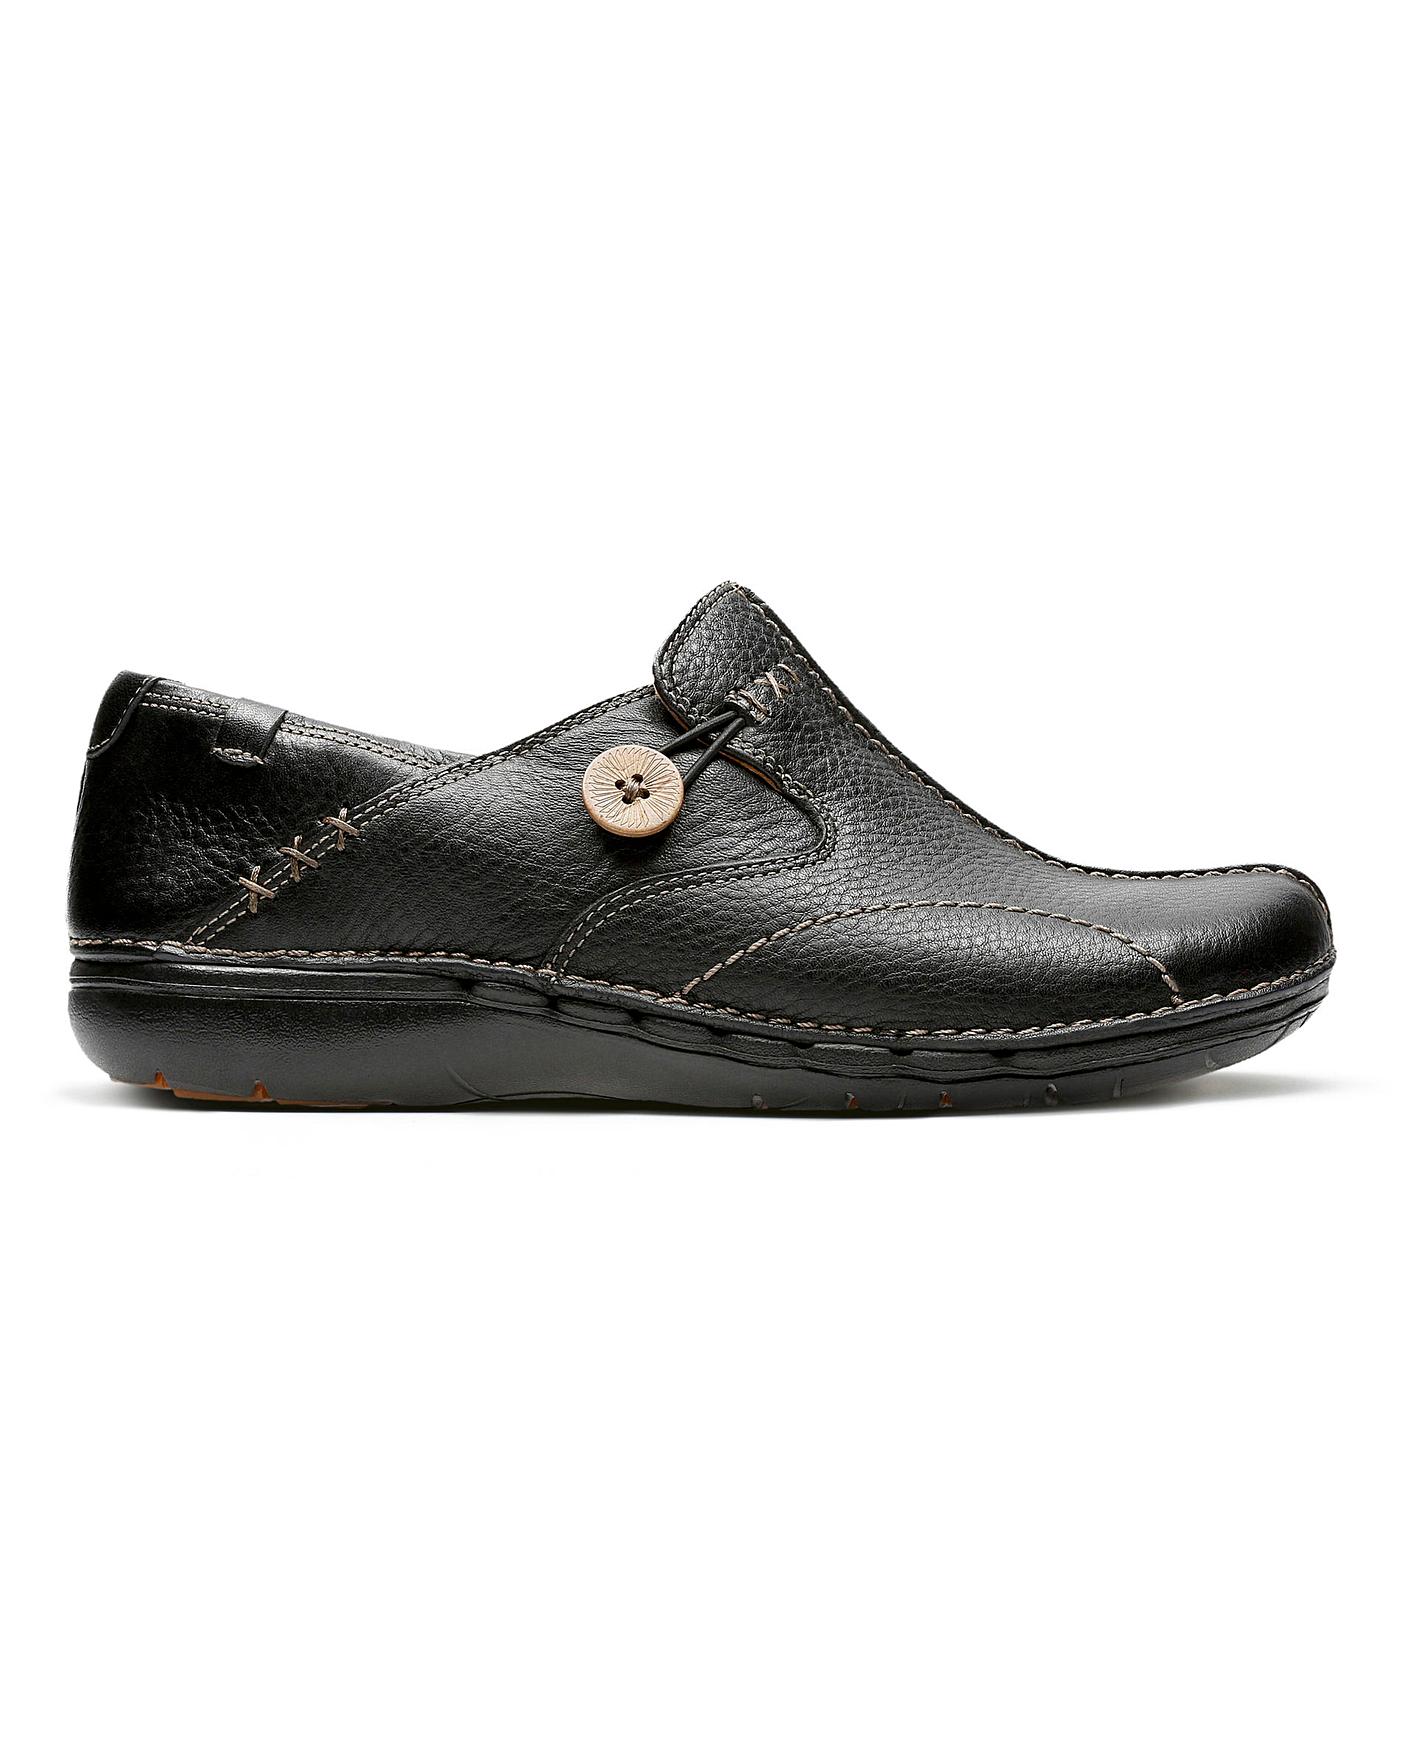 Clarks Un Loop Shoes E Fitting | Oxendales